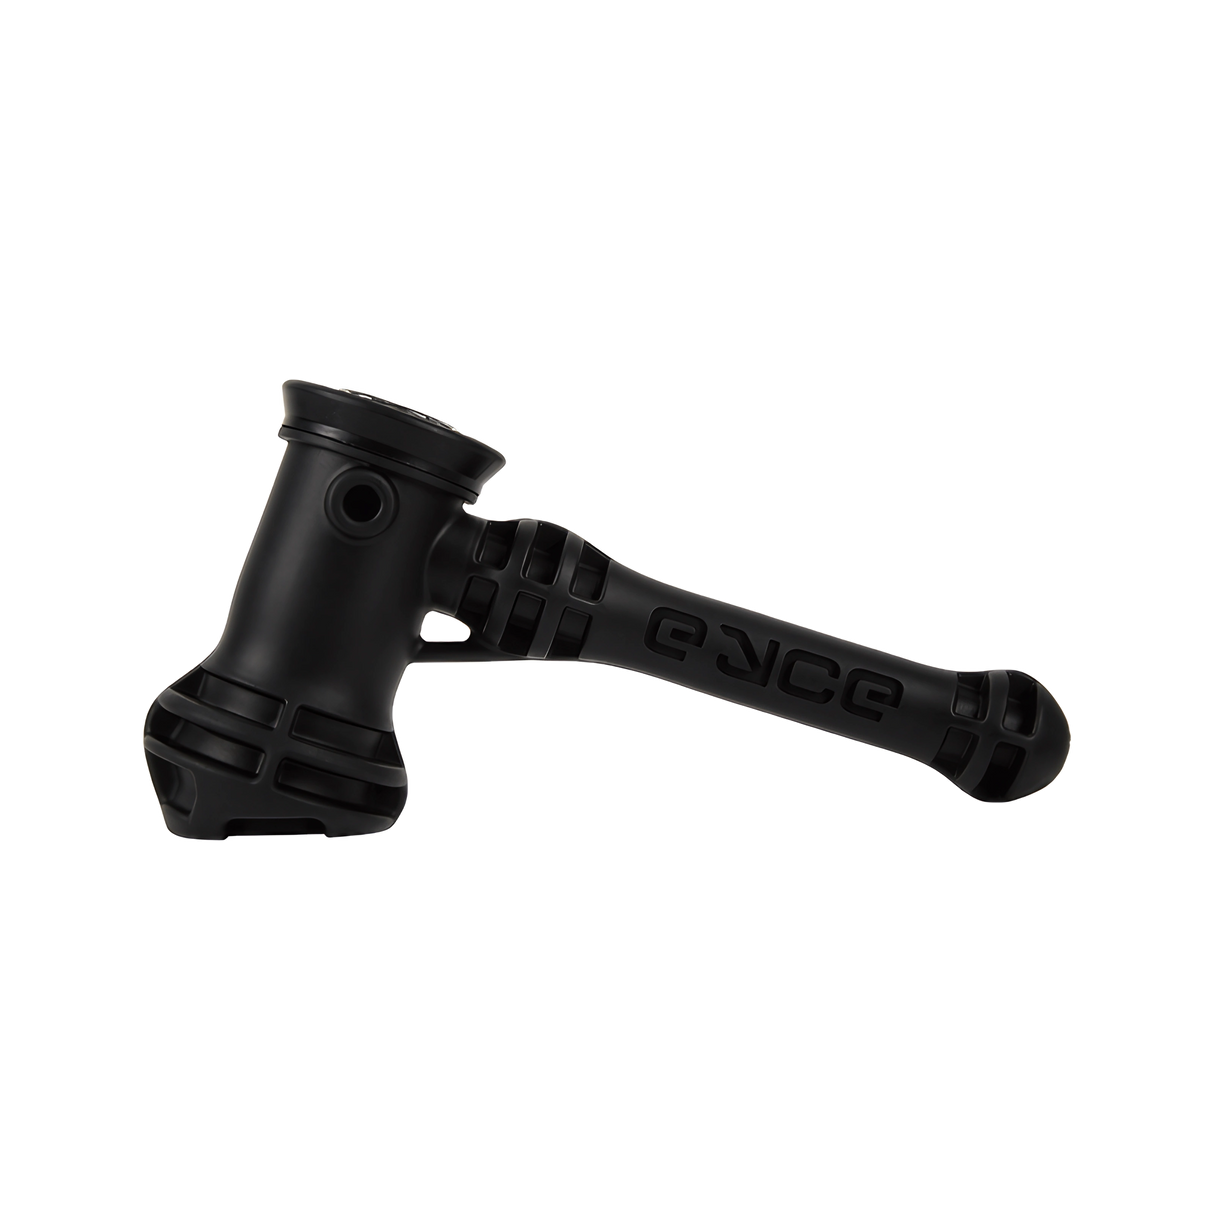 EYCE Hammer Bubbler in Black Silicone with Durable Design - Side View on White Background